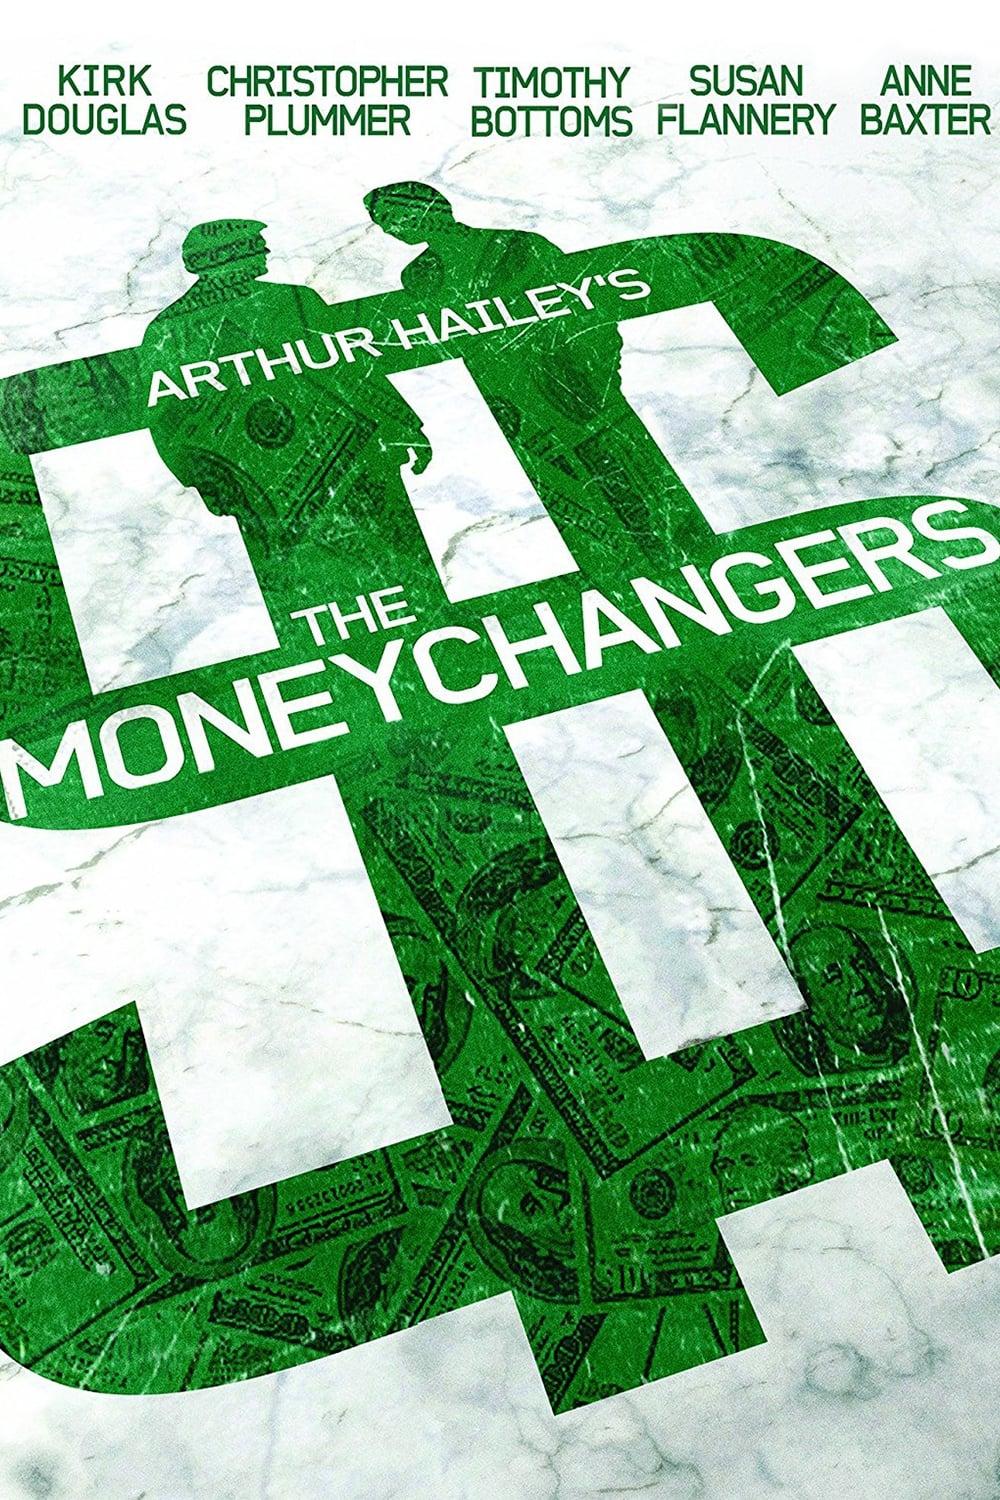 Arthur Hailey's The Moneychangers poster